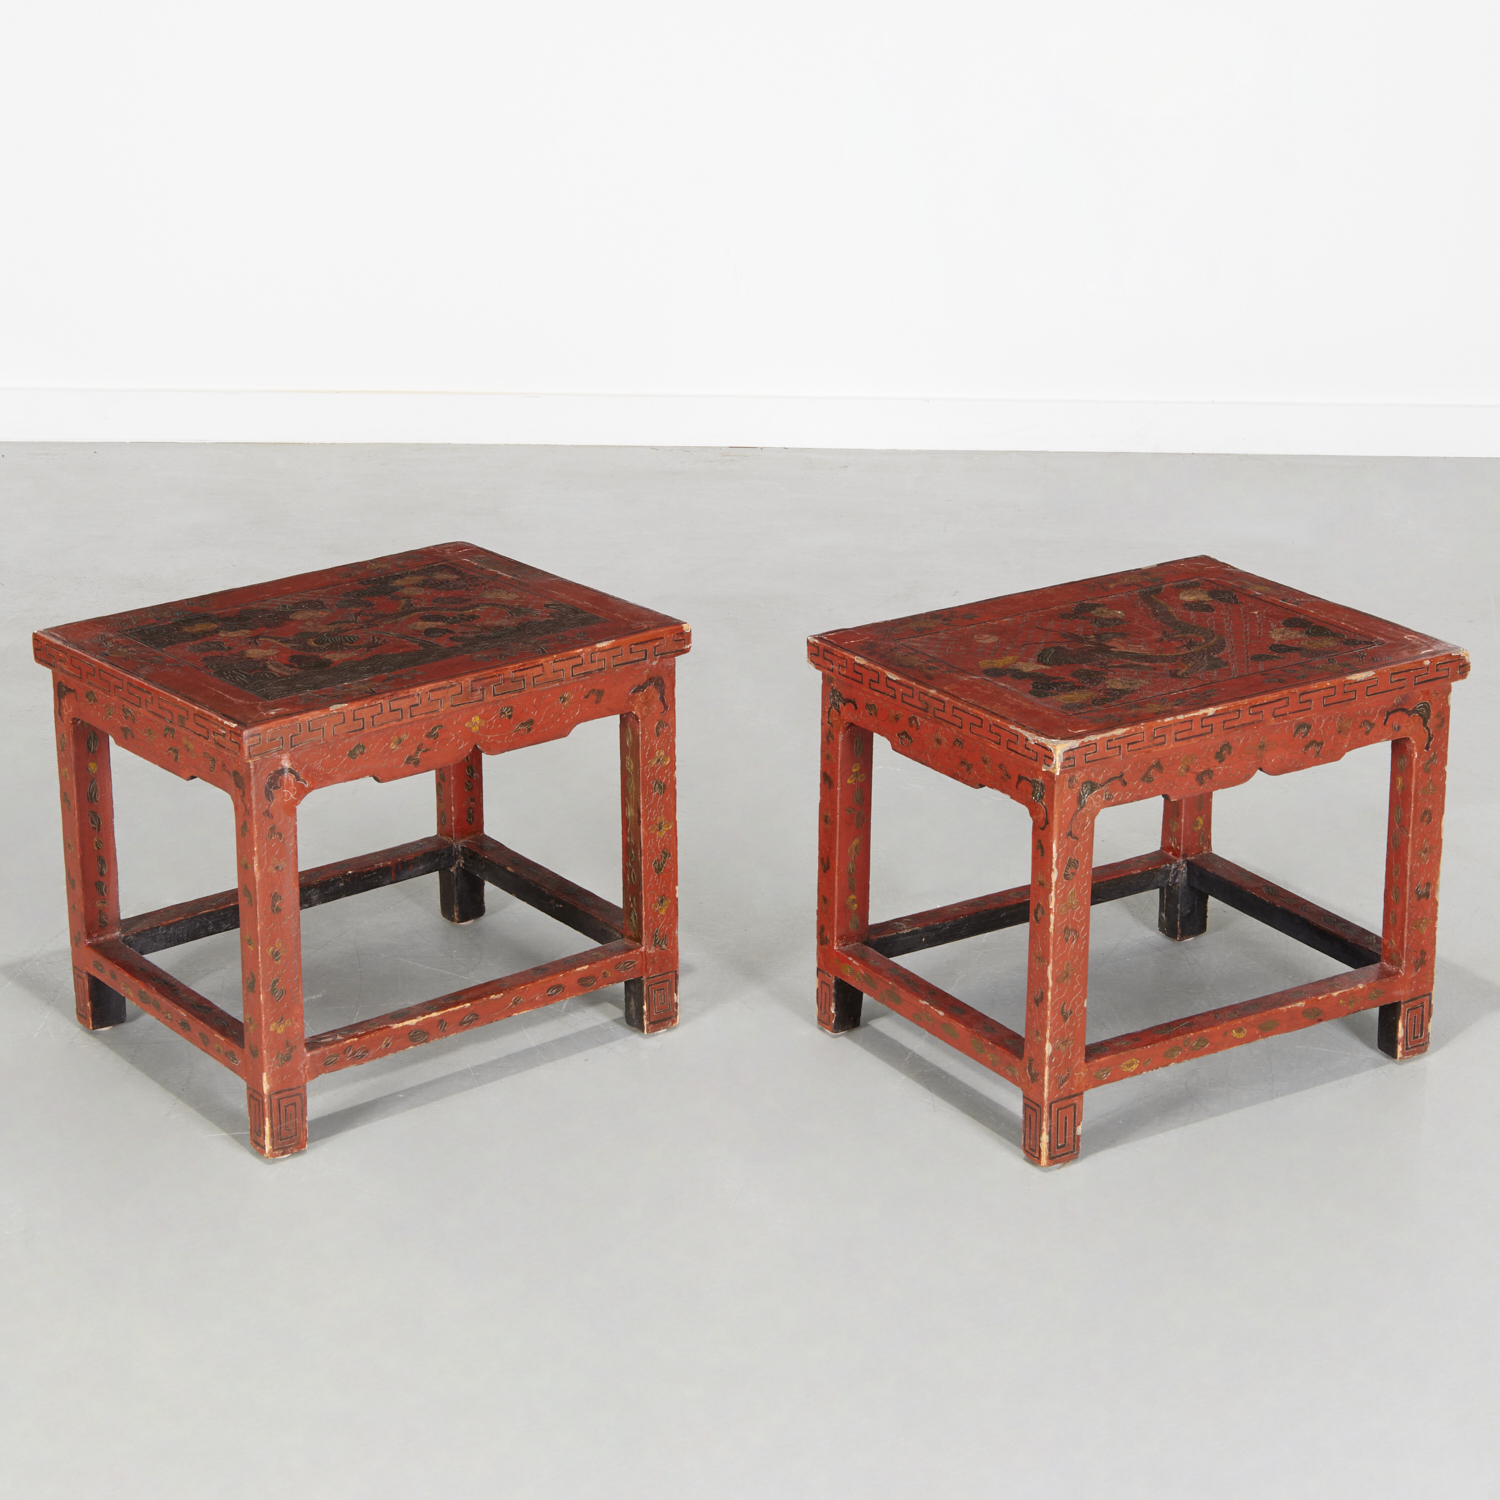 PAIR CHINESE EXPORT RED LACQUER